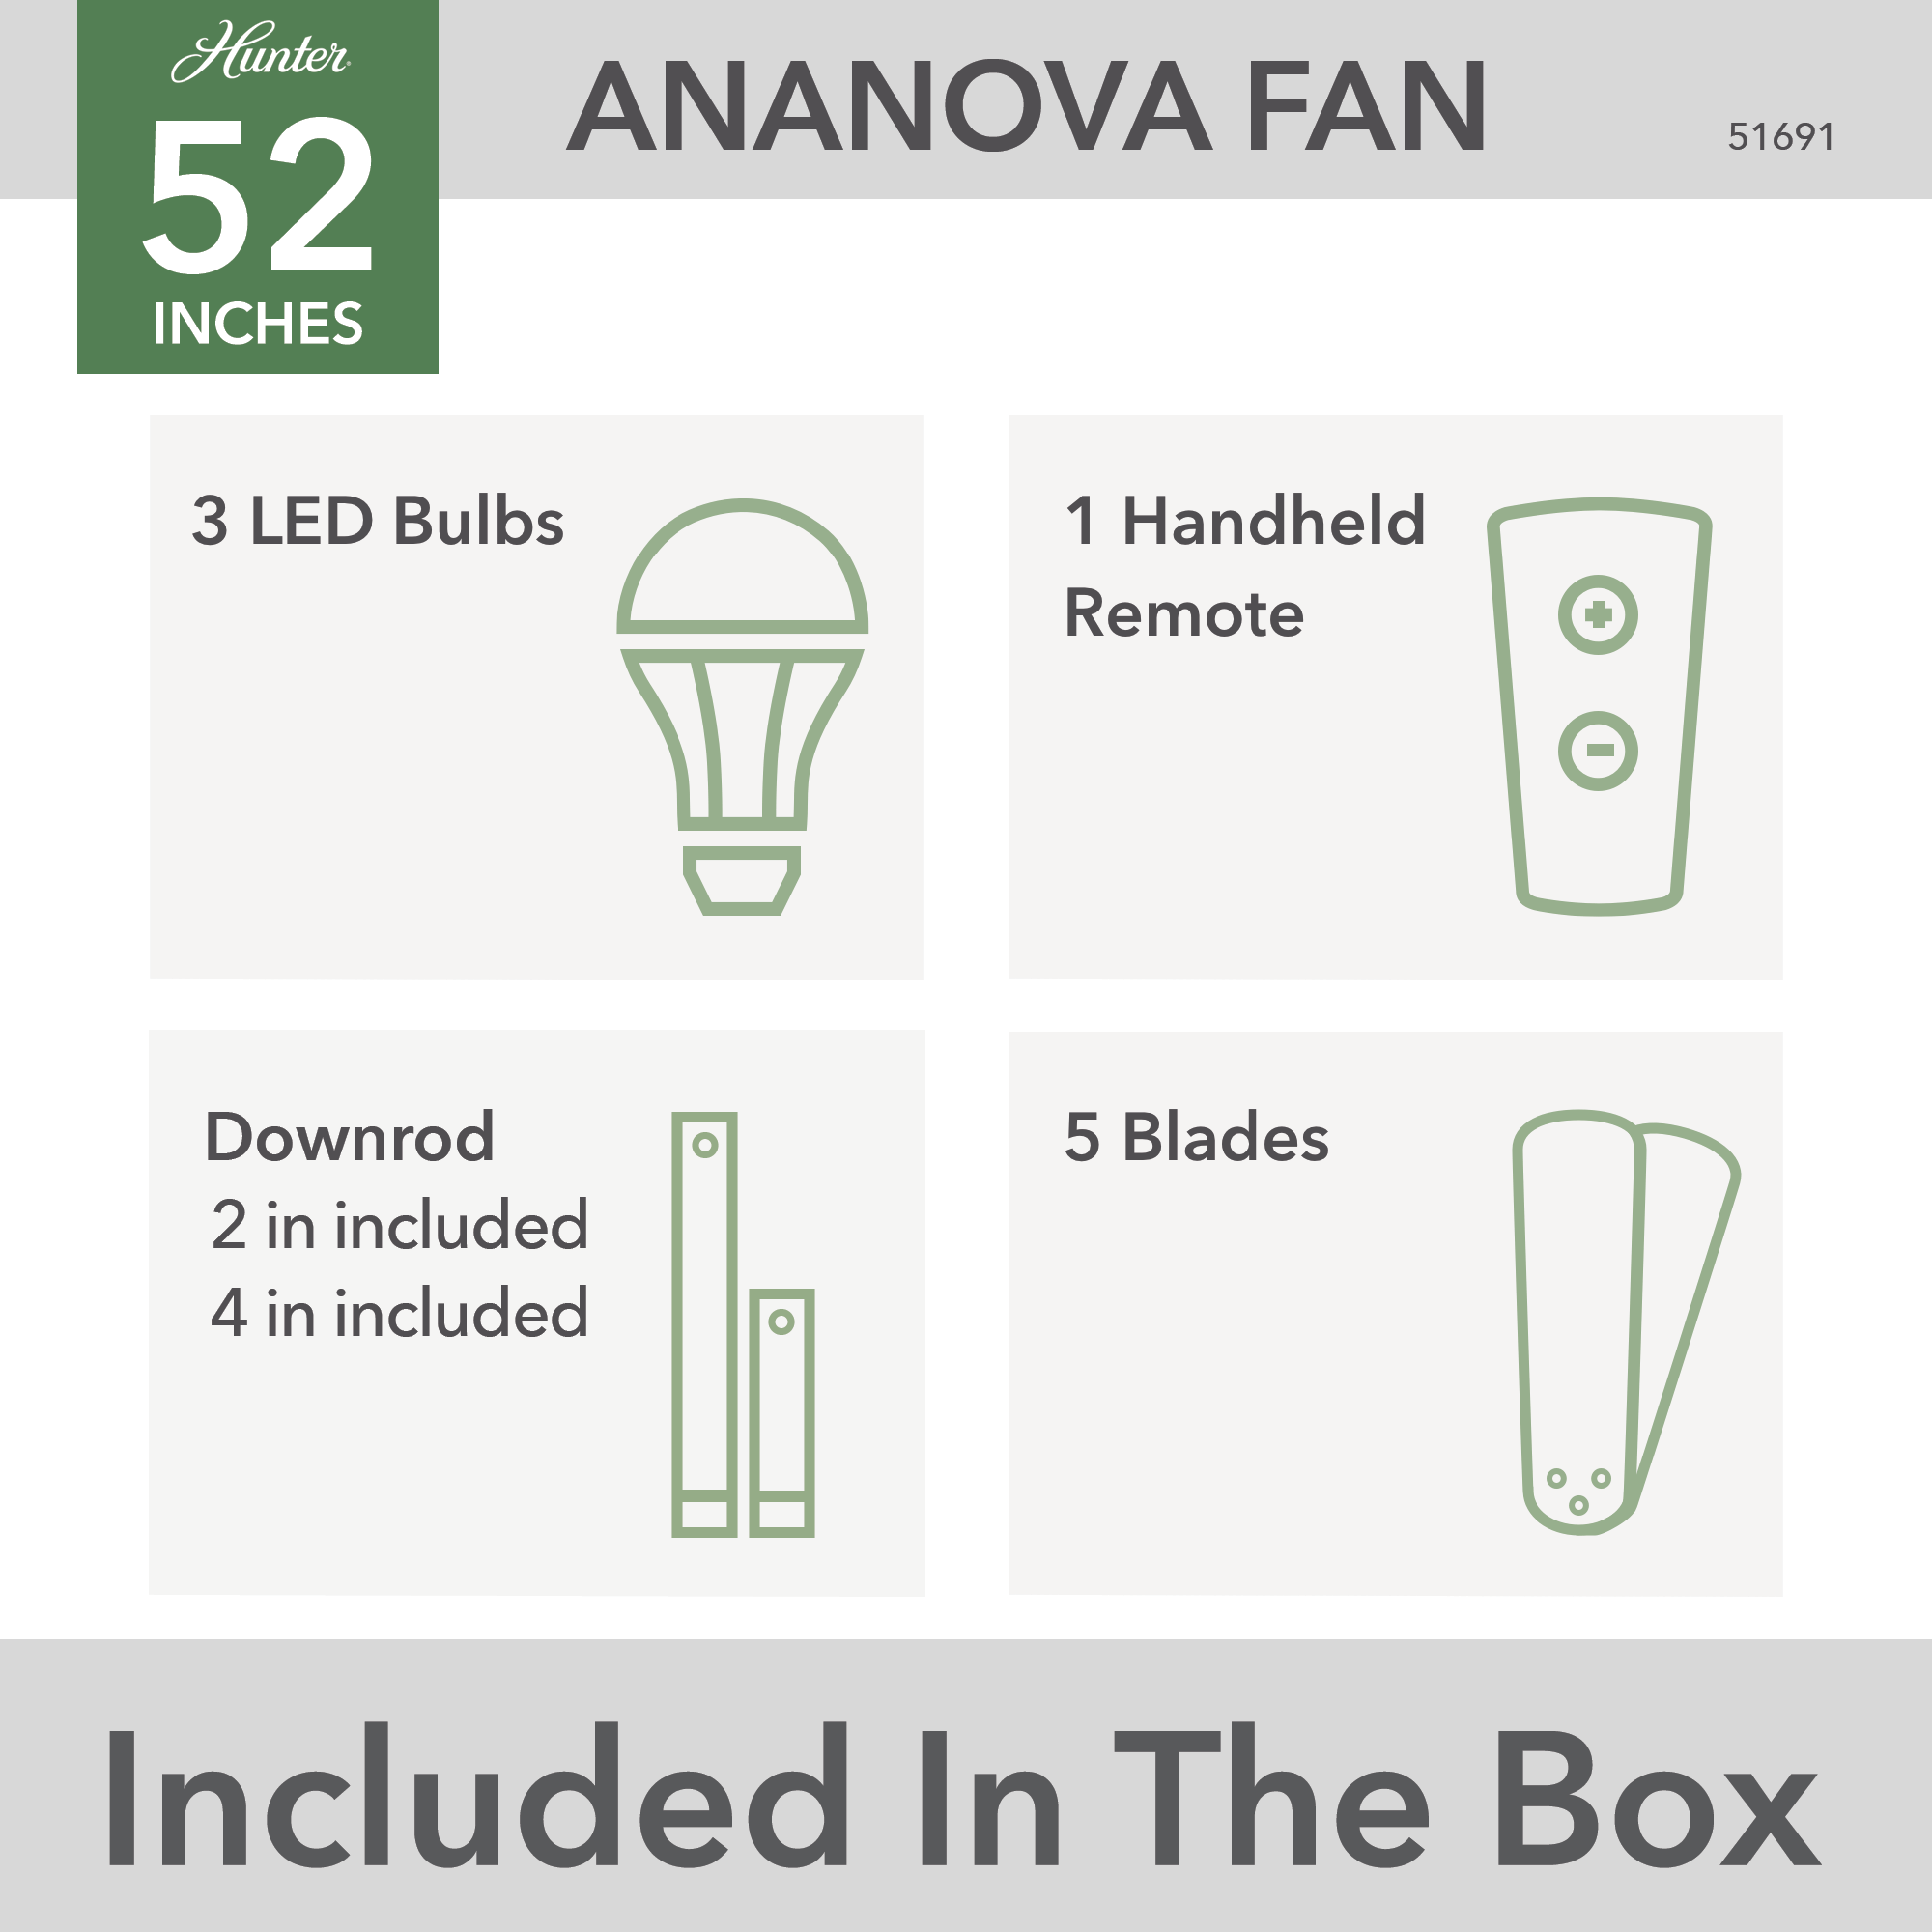 Hunter 52 inch Wi-Fi Ananova Ceiling Fan with LED Light Kit and Handheld Remote Ceiling Fan Hunter   